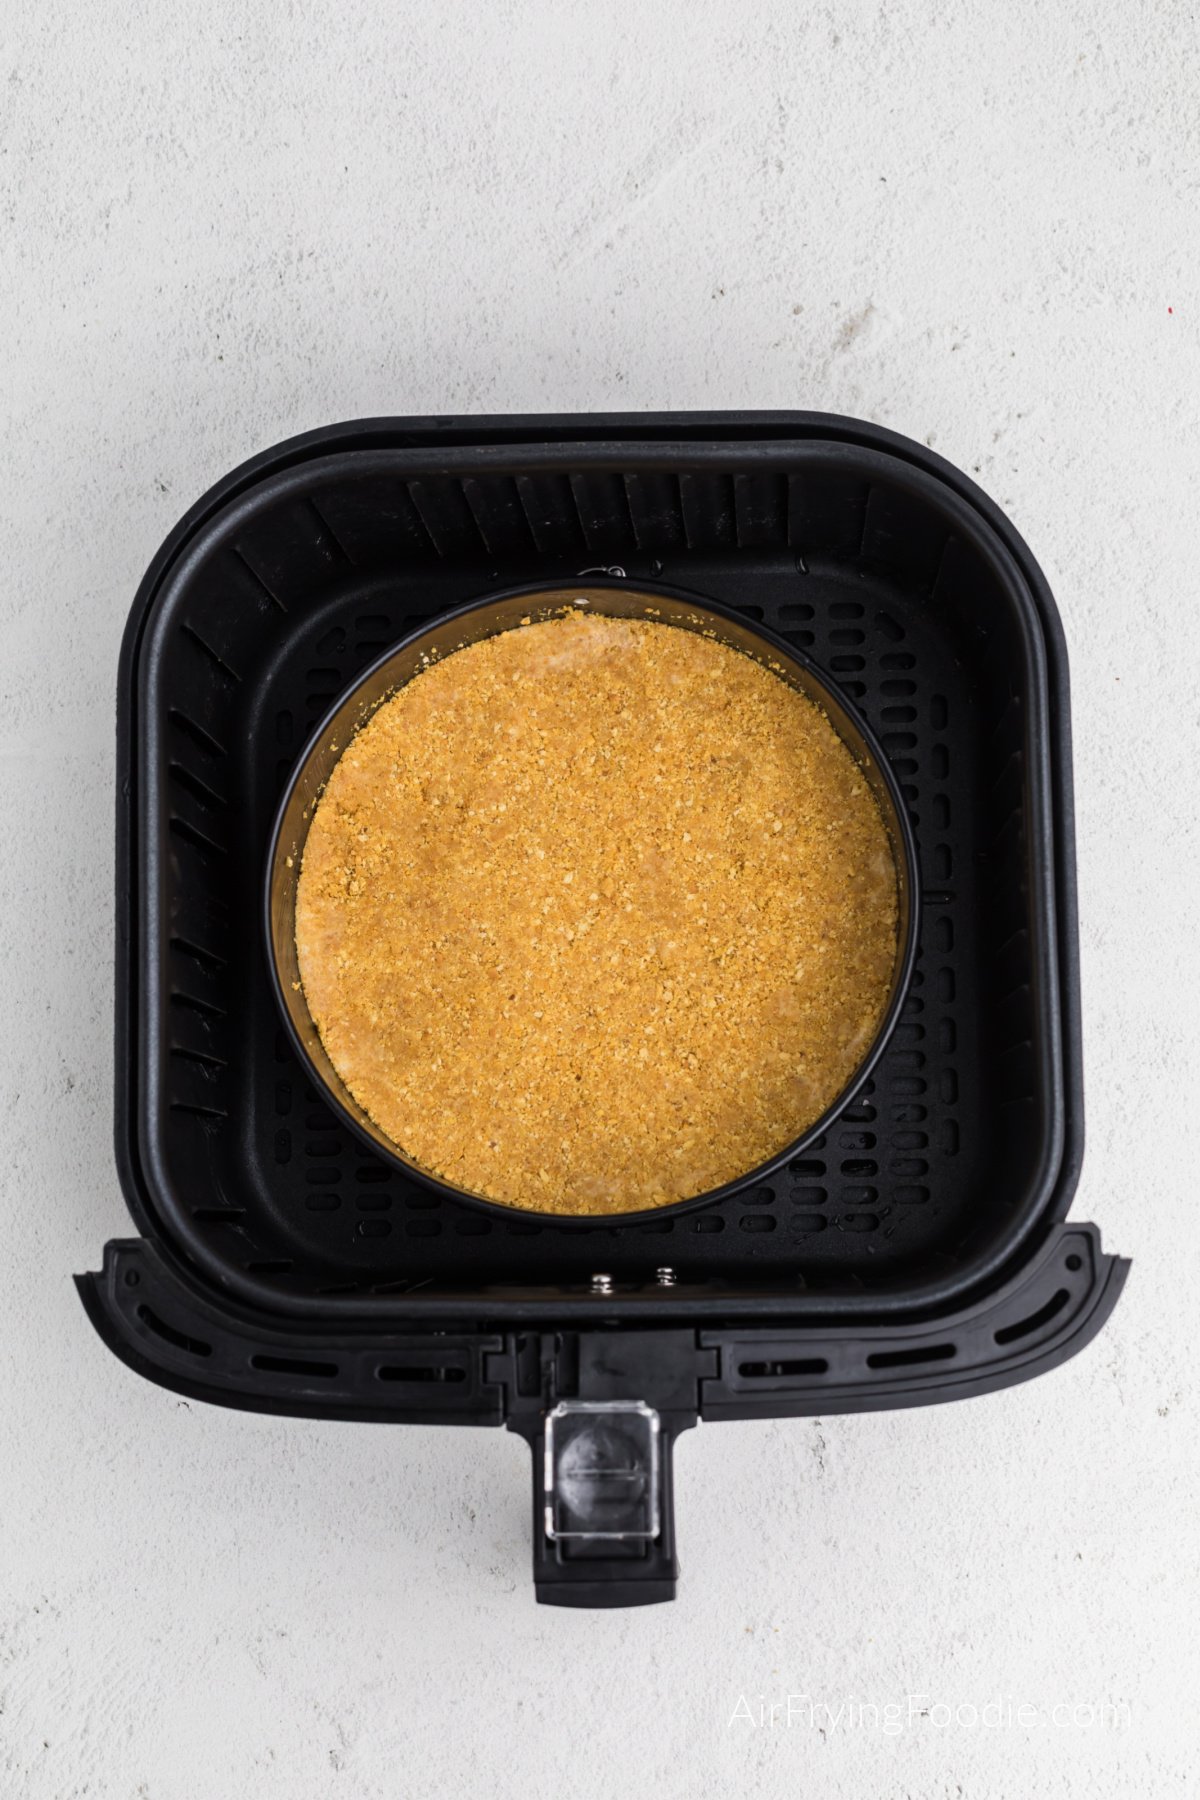 graham cracker crust in the air fryer basket ready to cook